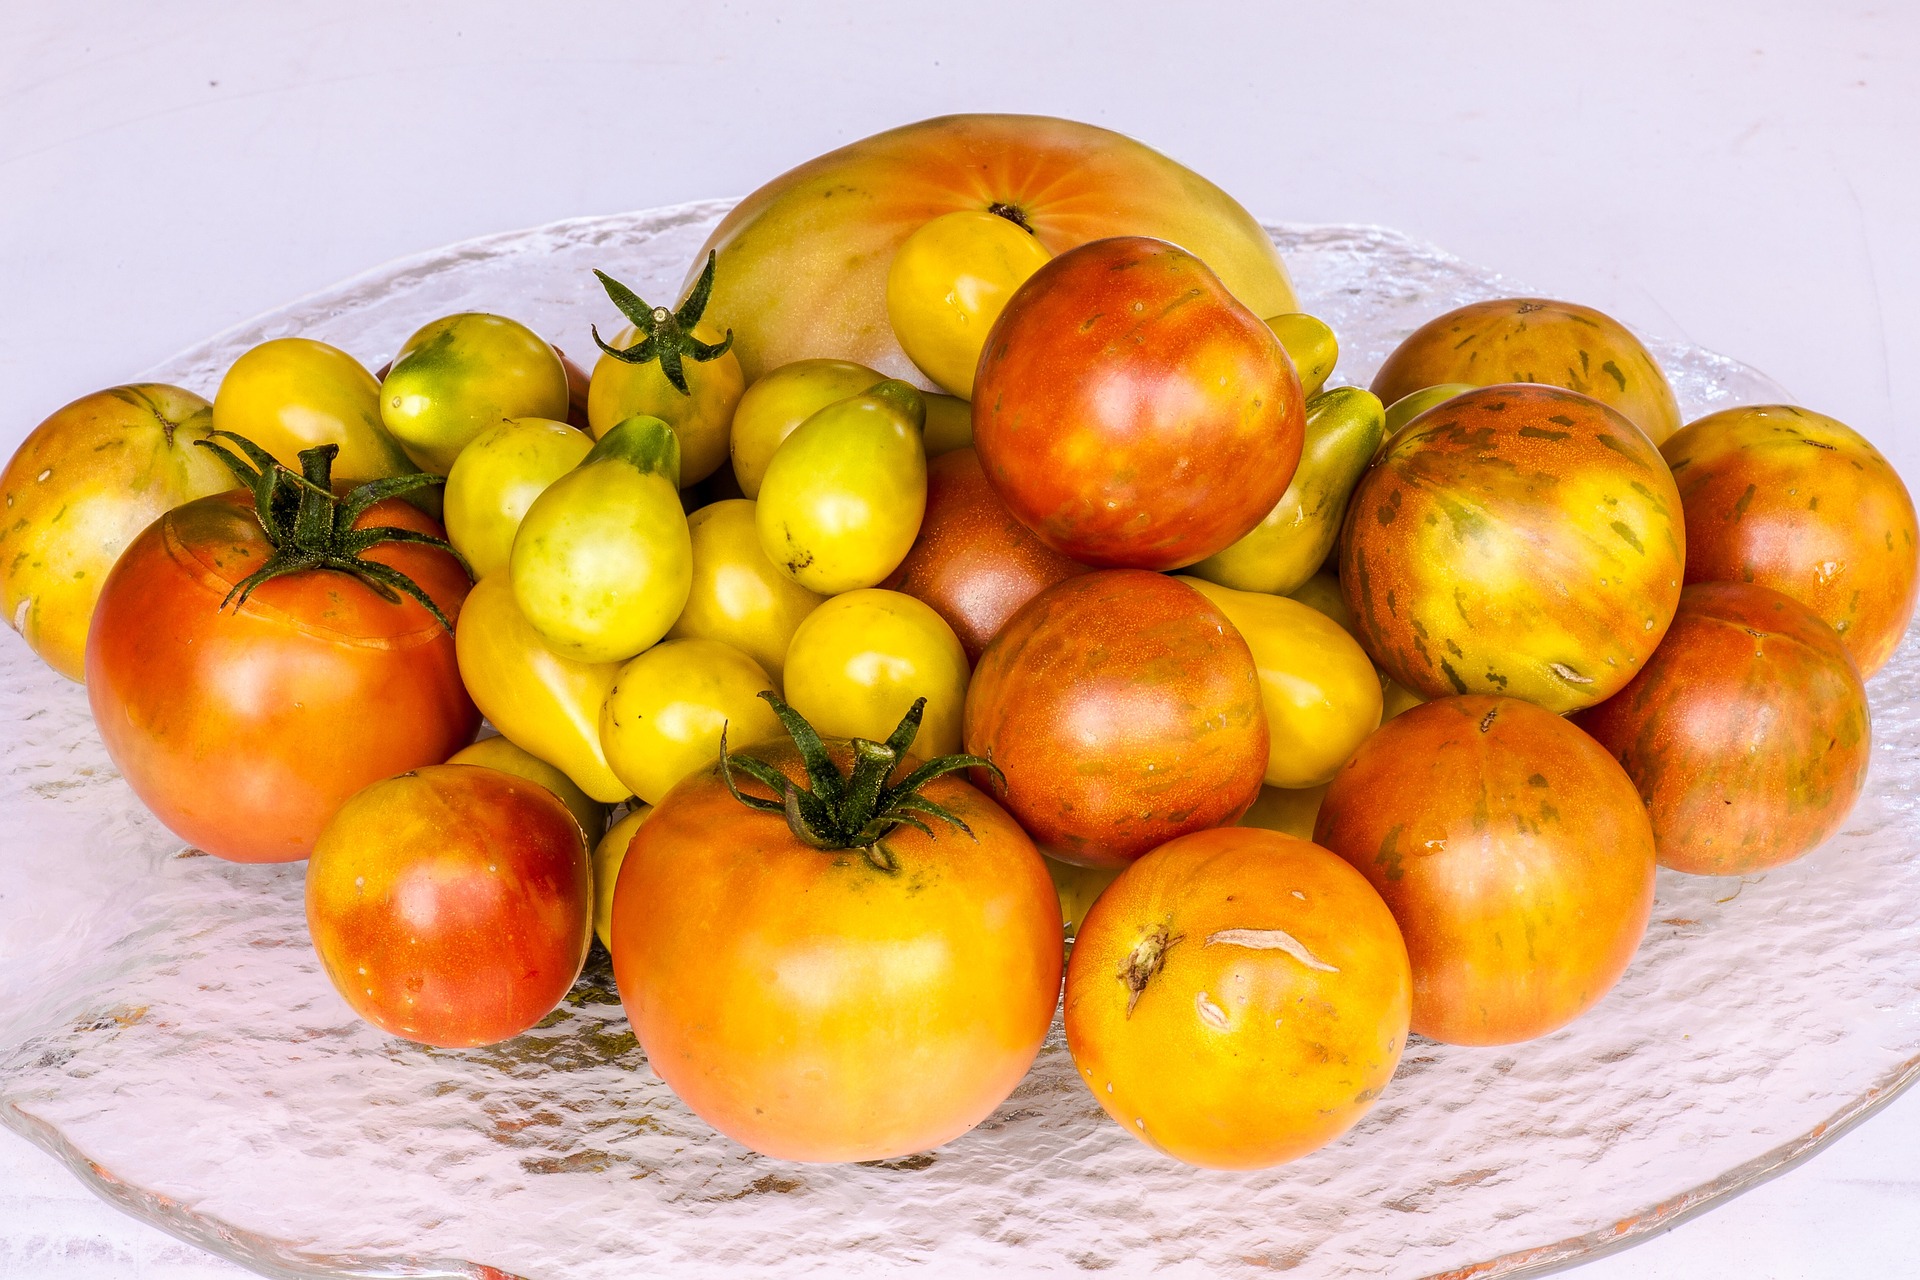 Preserve tomatoes now to enjoy the sweet rewards of your summer veggie garden long after harvest season is over.